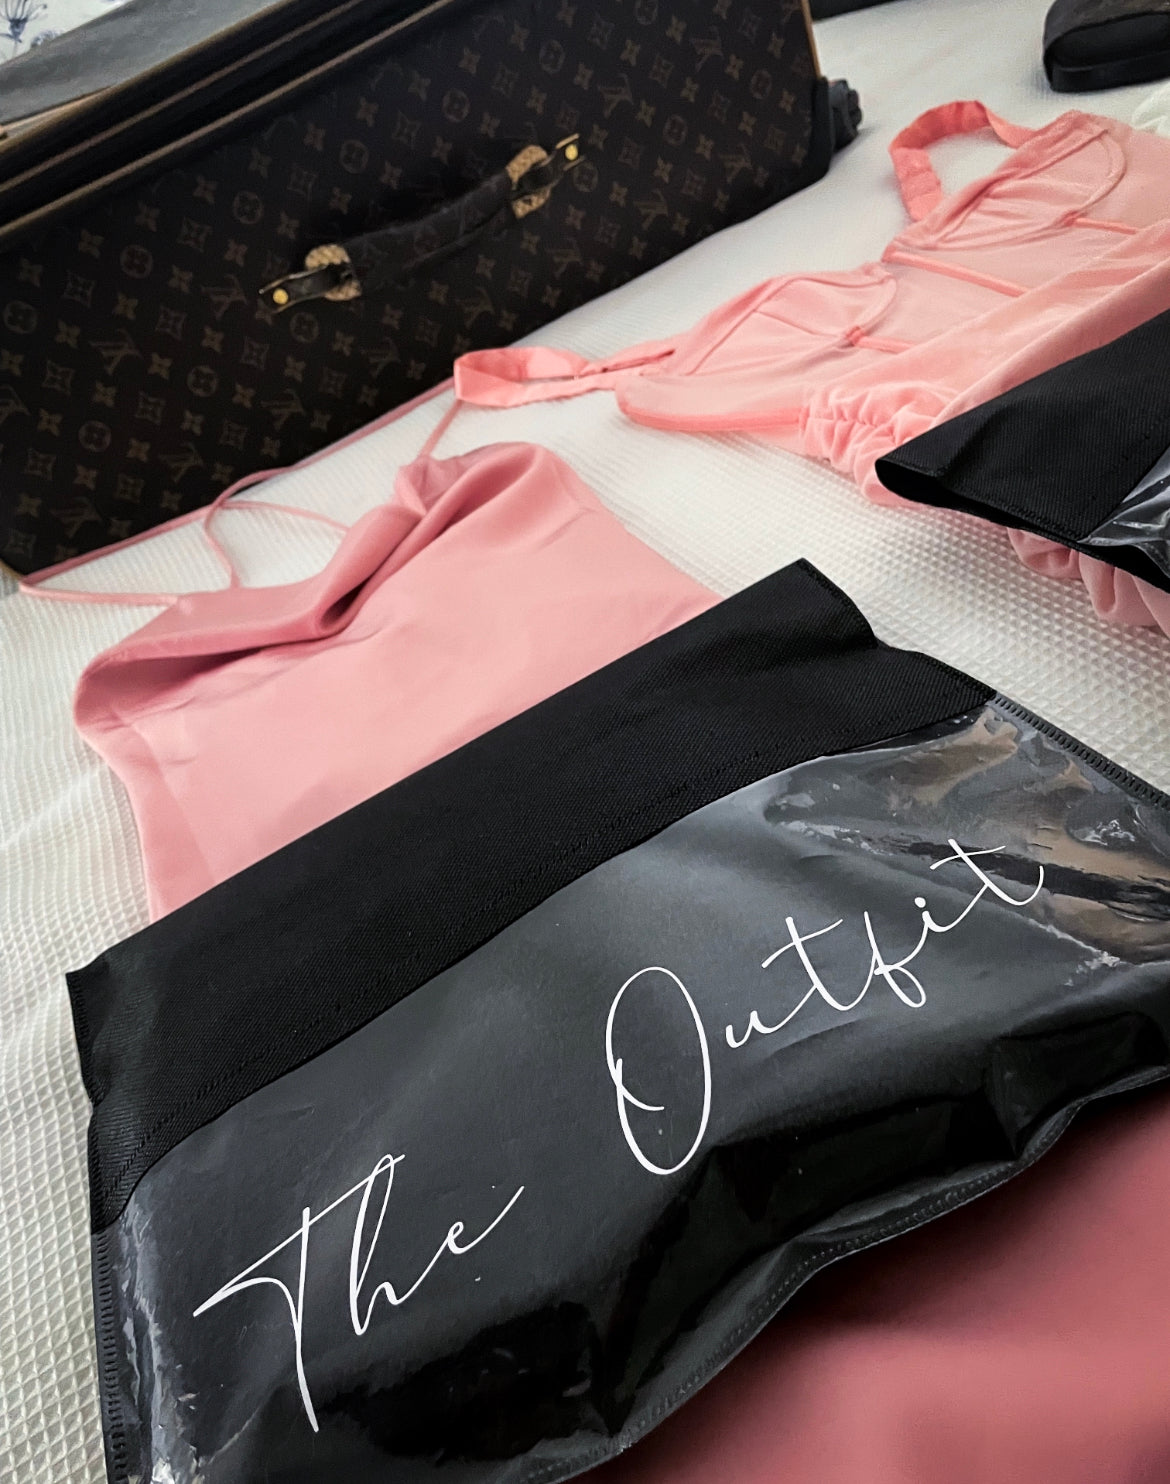 outfit organiser outfit planner. protect outifts. protect clothes bags. plan outfits